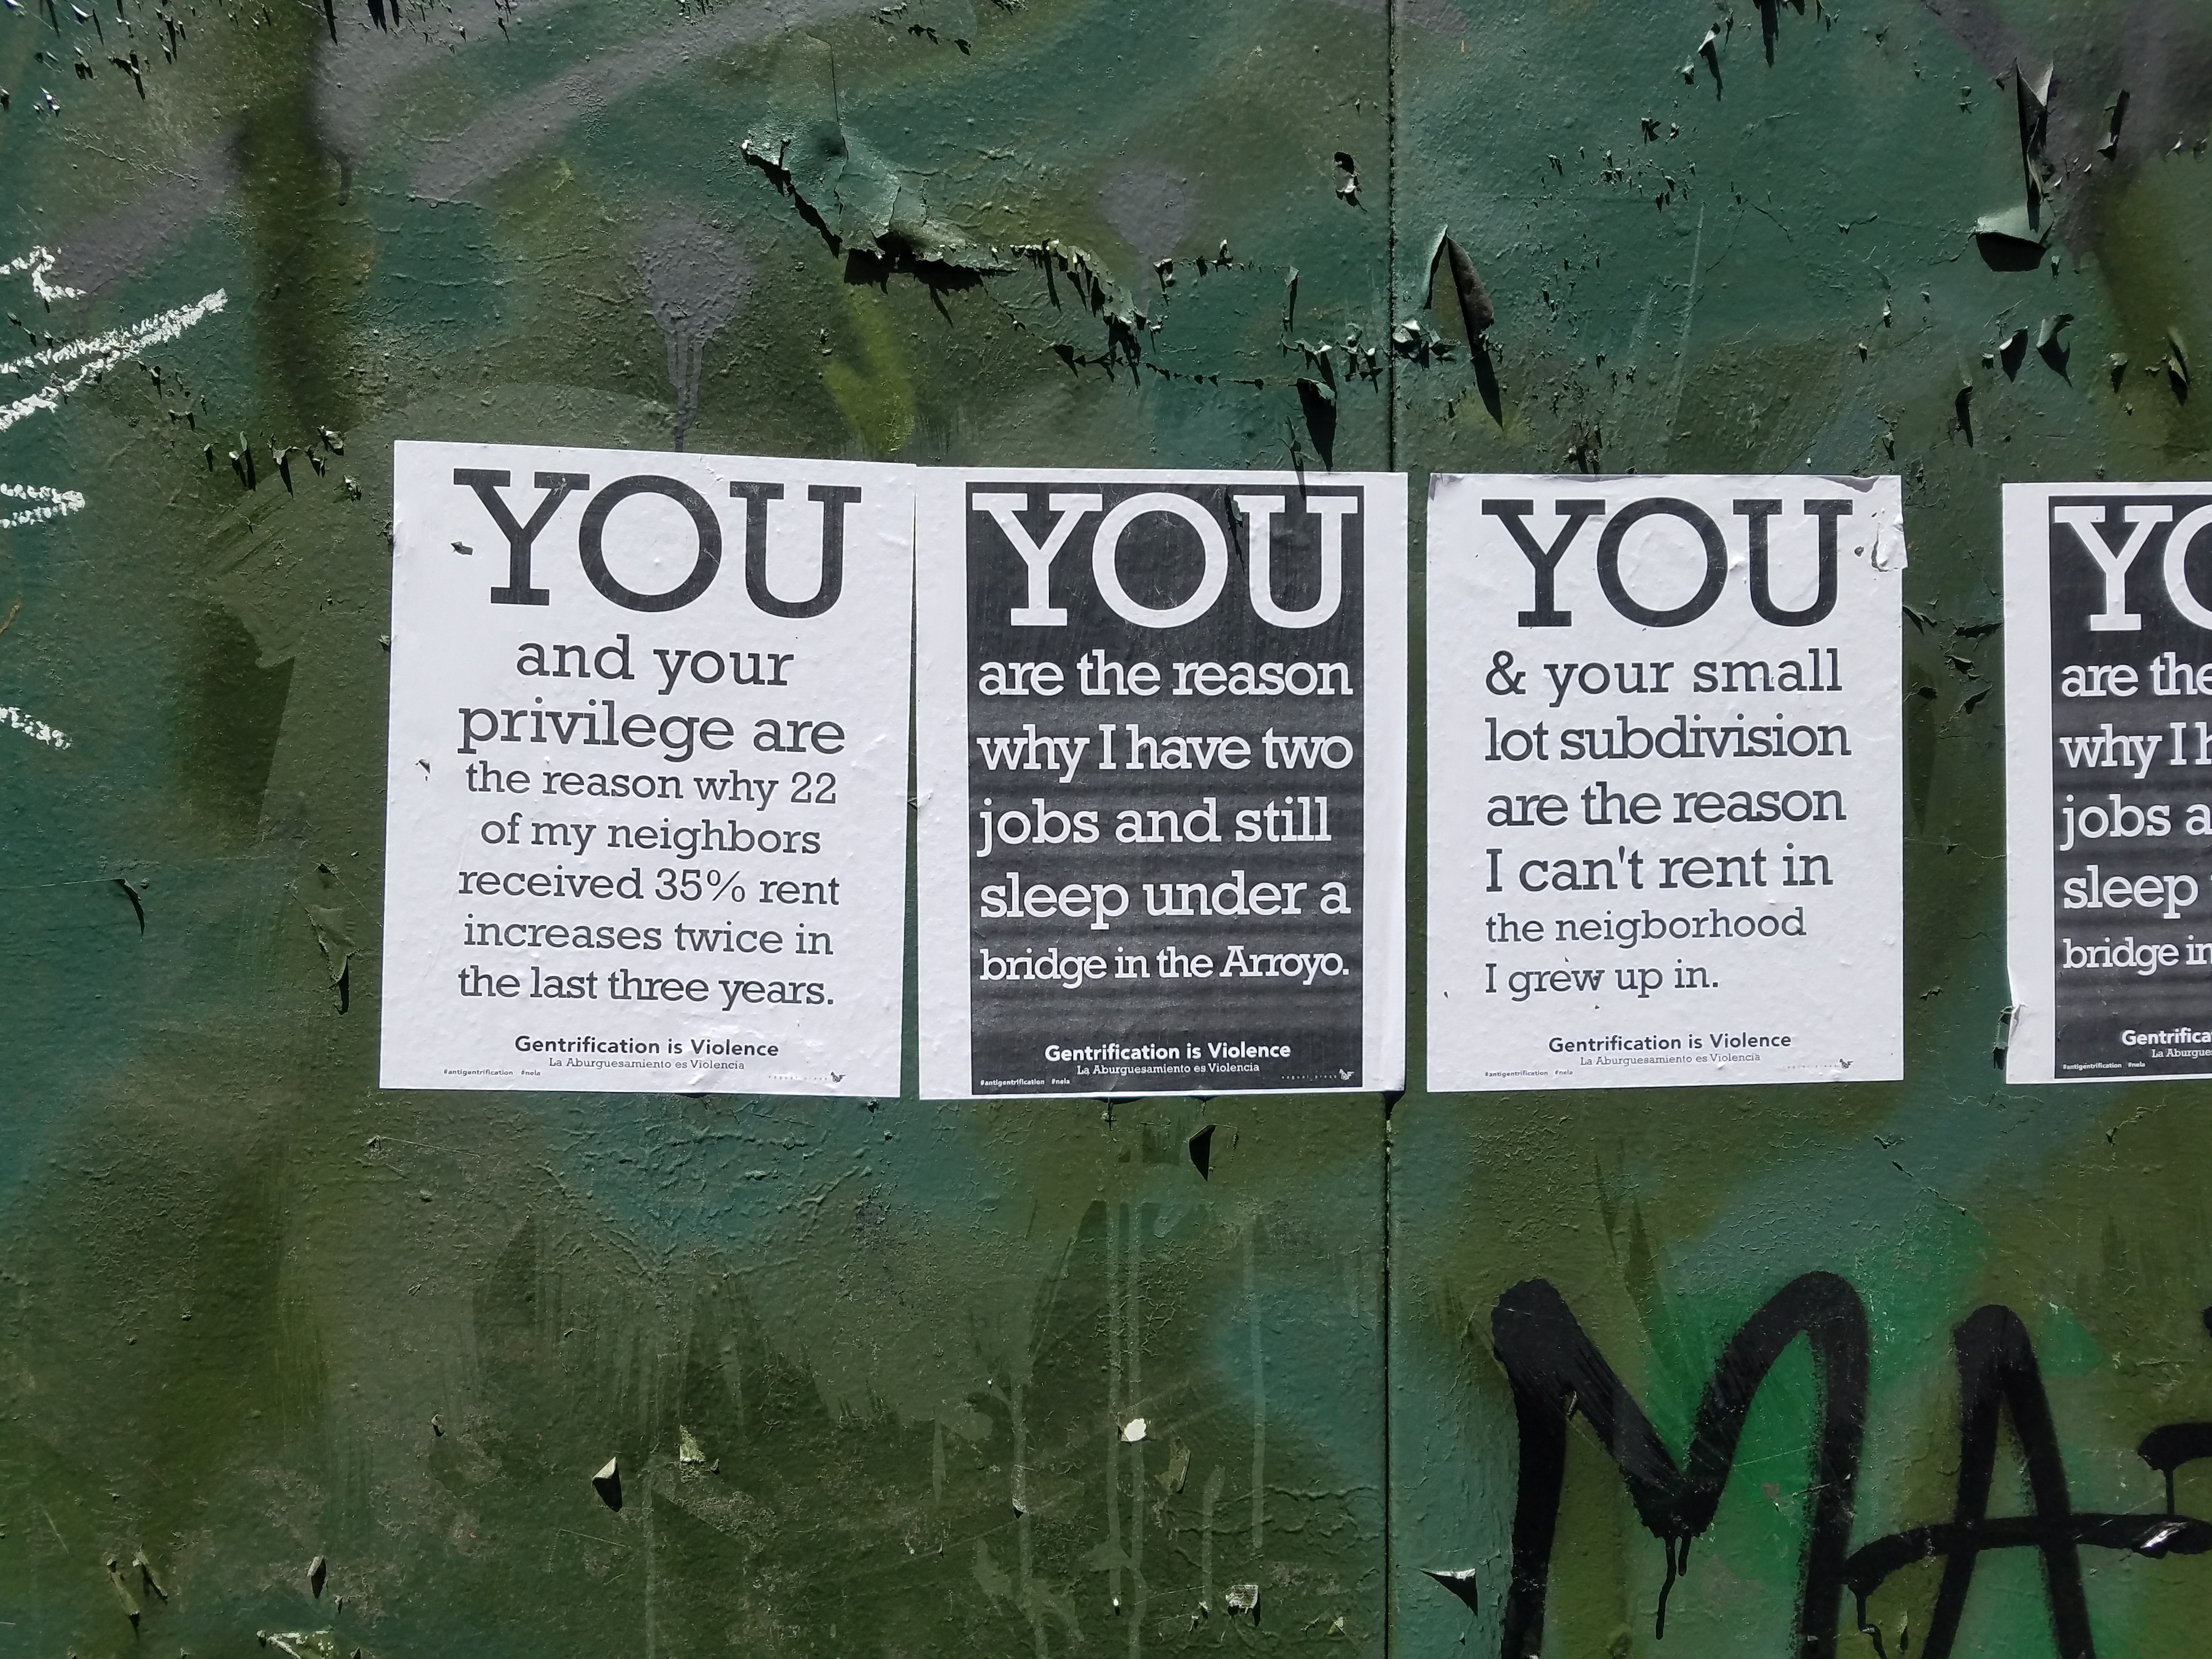 Anti-genetrification flyers posted on a wall